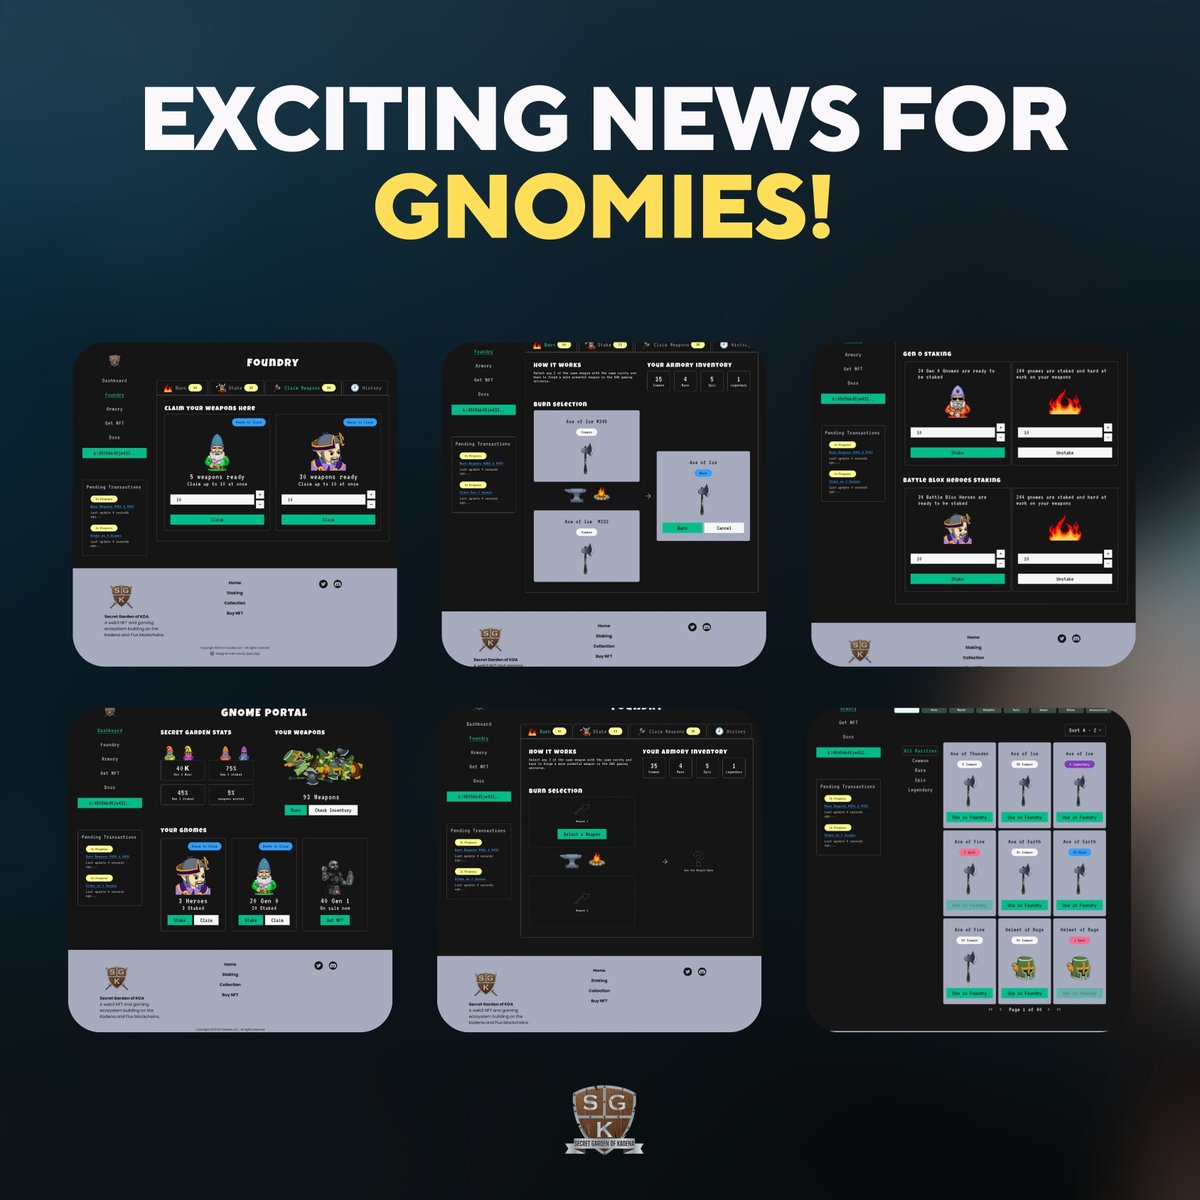 🔥 Exciting News for Gnomies! 🔥 Gear up for the Burn Upgrade and more on the enhanced Foundry/Armory webpage! Our team is developing an upgrade system for weapons/gear holders. 🚀 Explore the upgrades, and your feedback is welcome, fam! LFG Gnomies! ⚔️🌟 #UpgradeComingSoon…